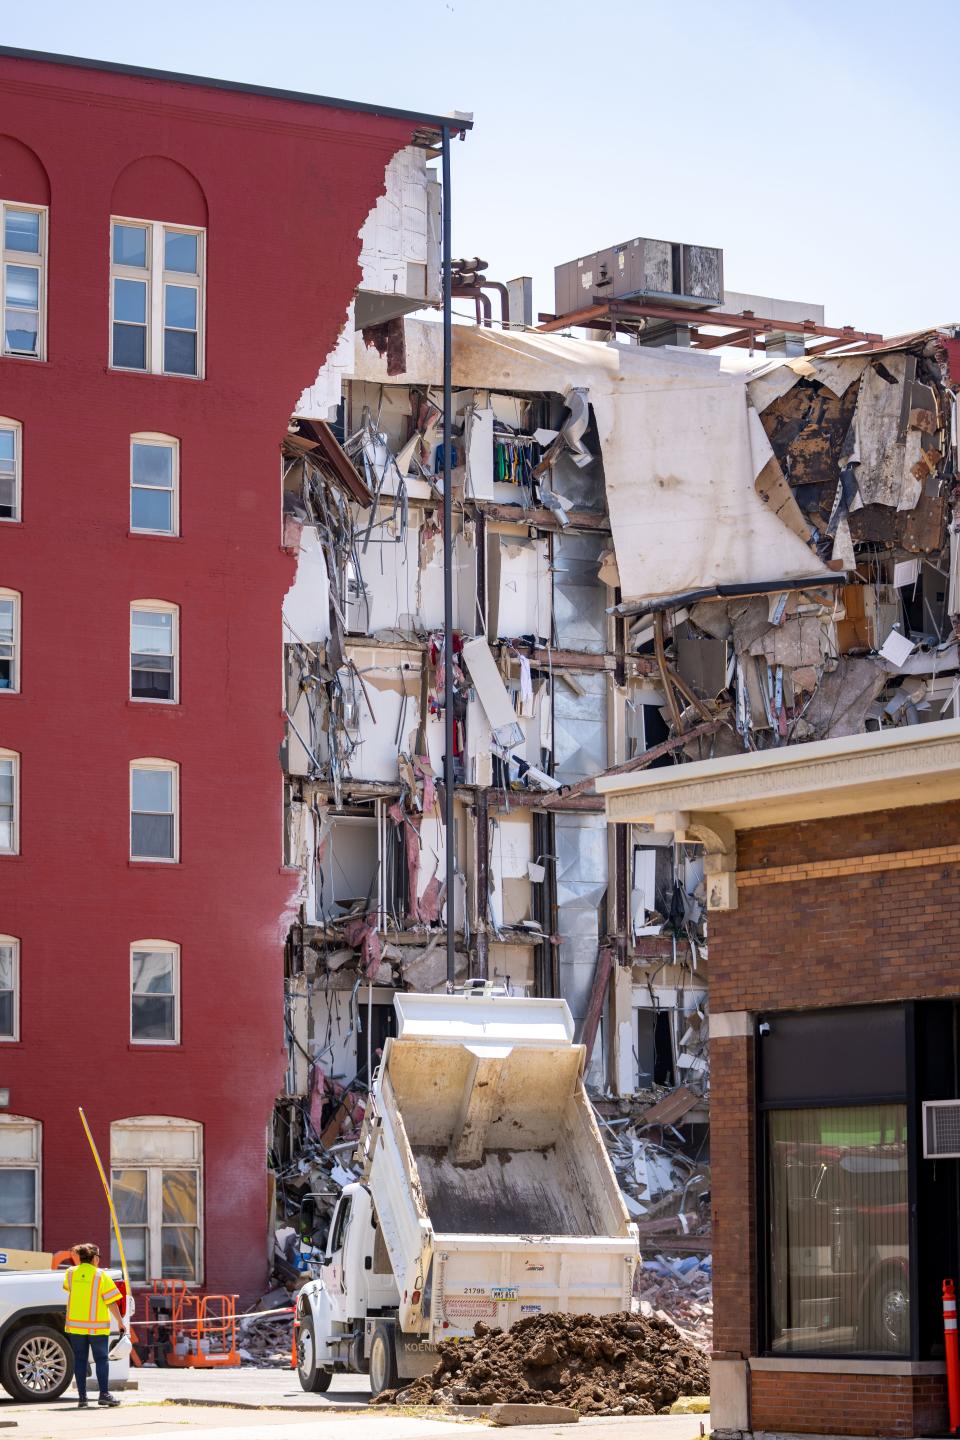 Workers secure the area Monday after an apartment building partially collapsed in Davenport, Iowa.